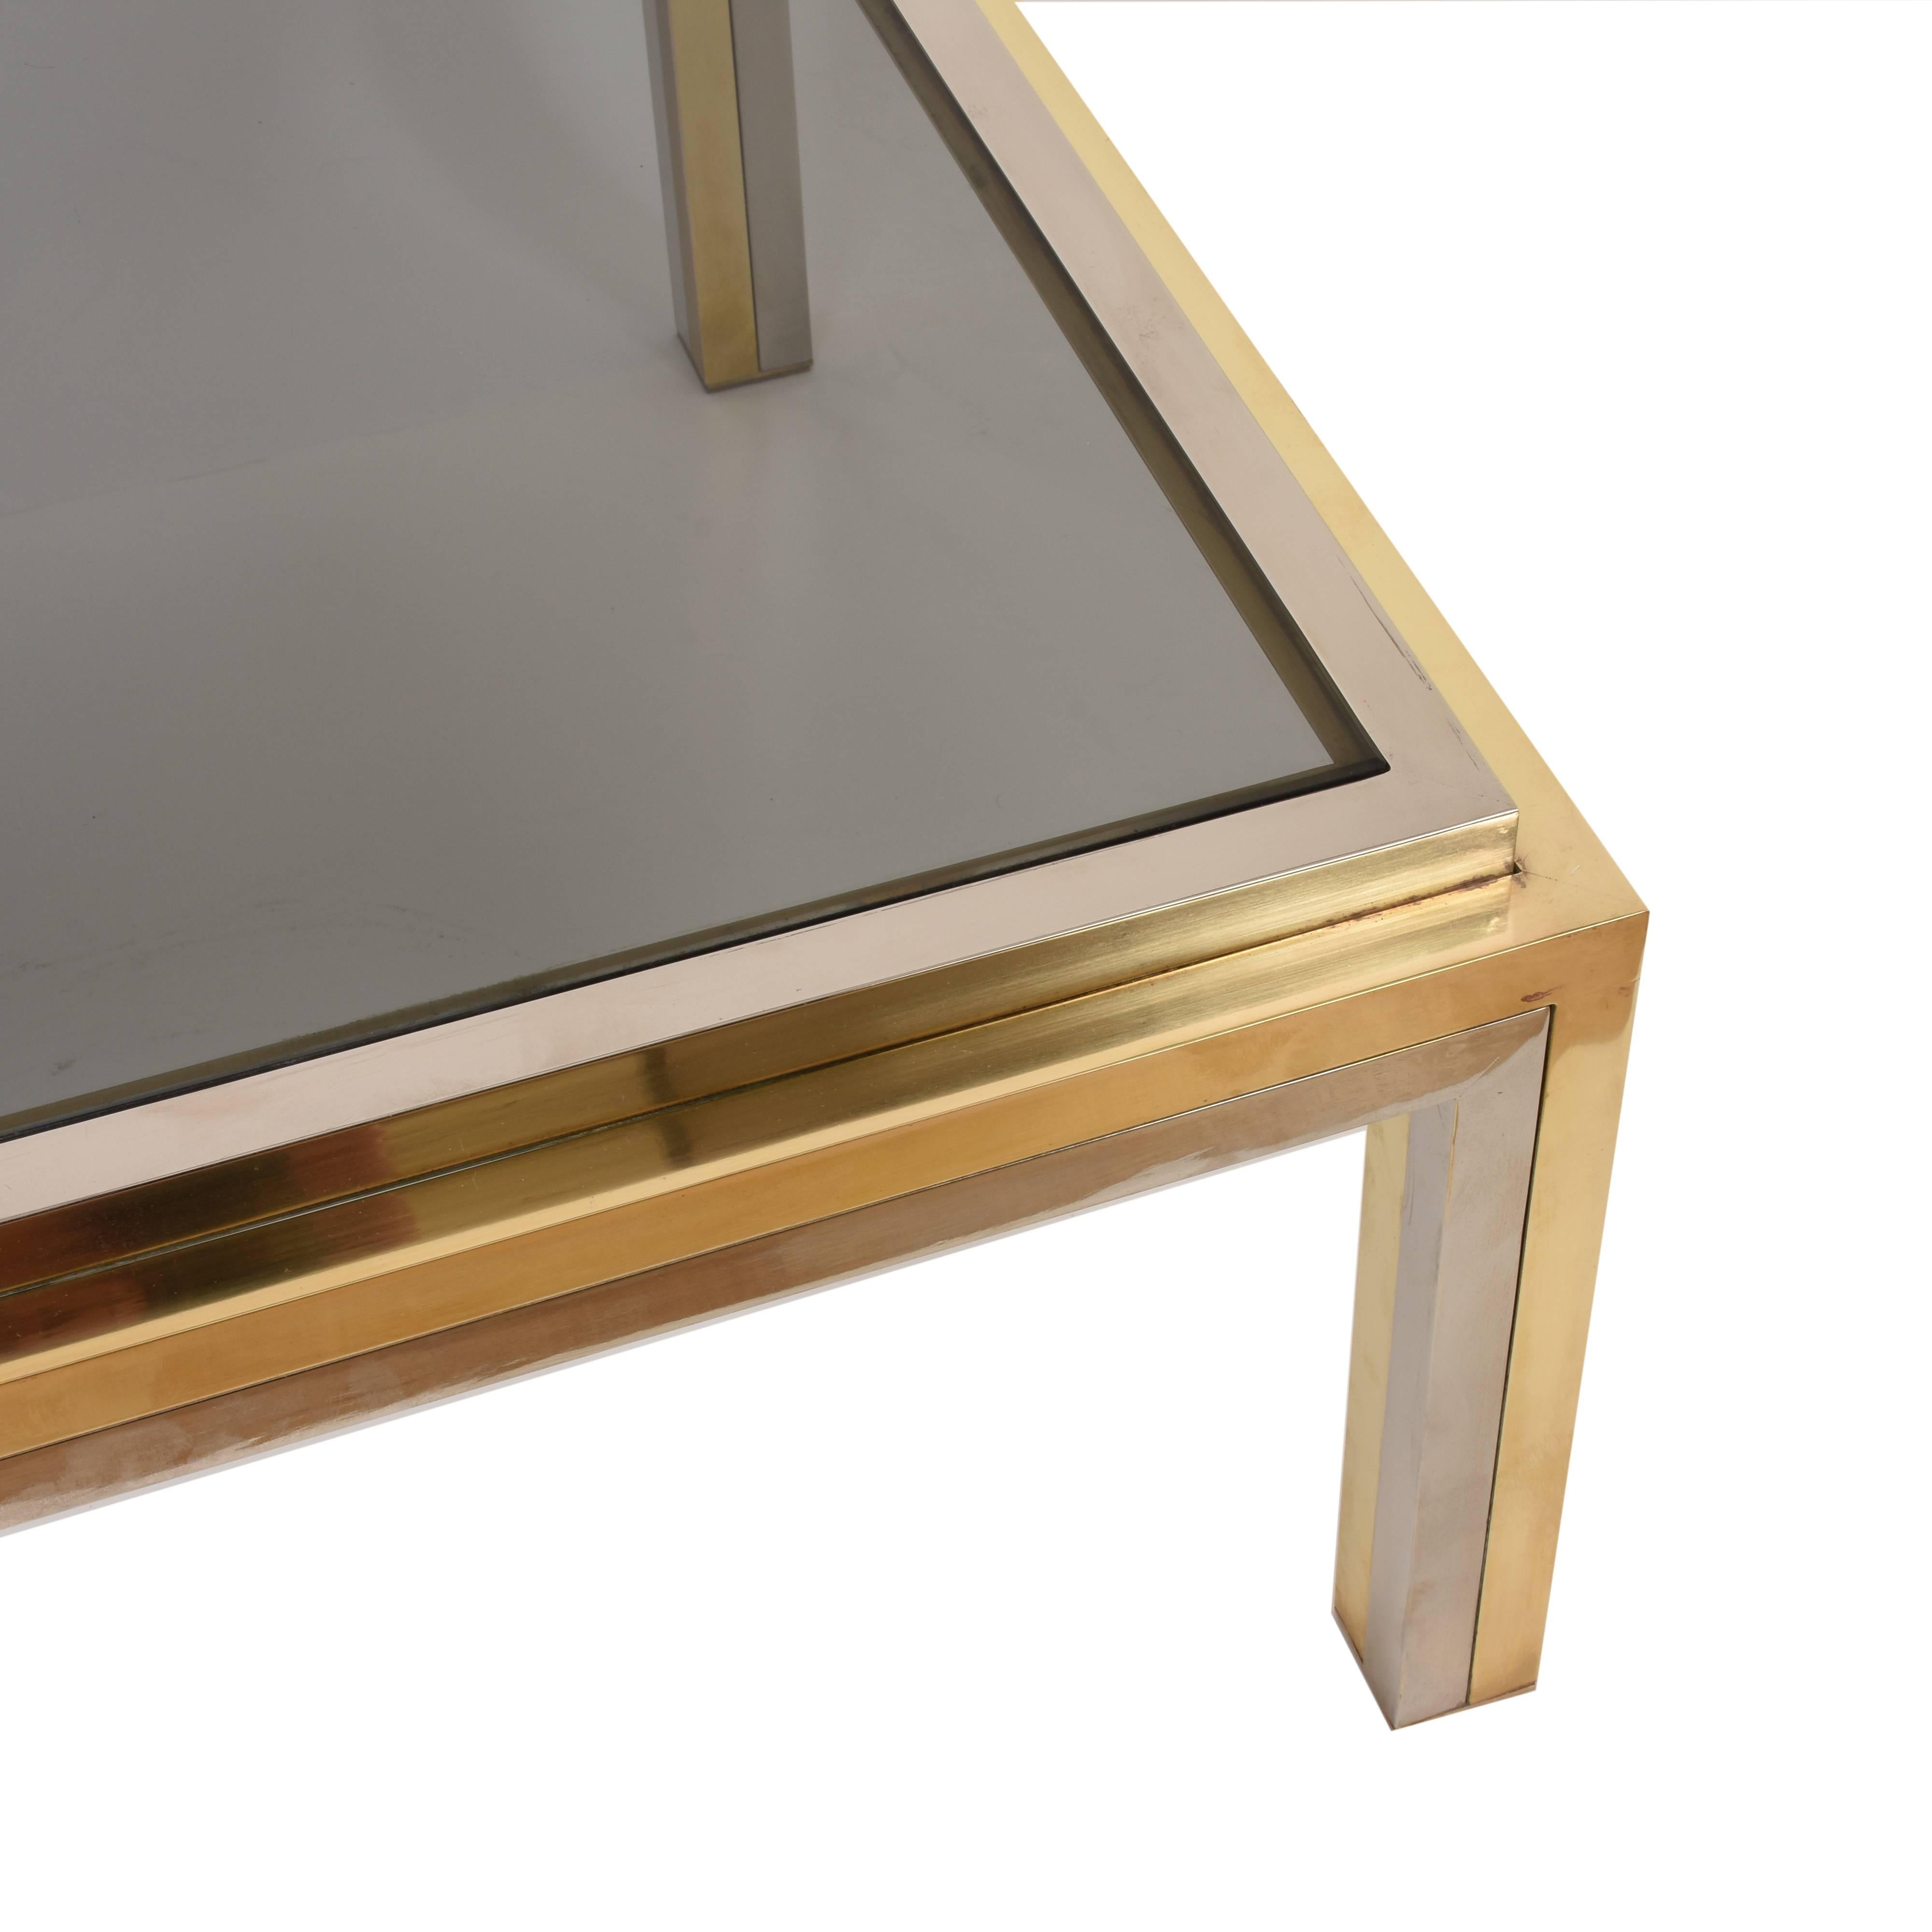 Italian Midcentury Rega Smoked Glass, Brass and Chrome Square Coffee Table, Italy 1970s For Sale